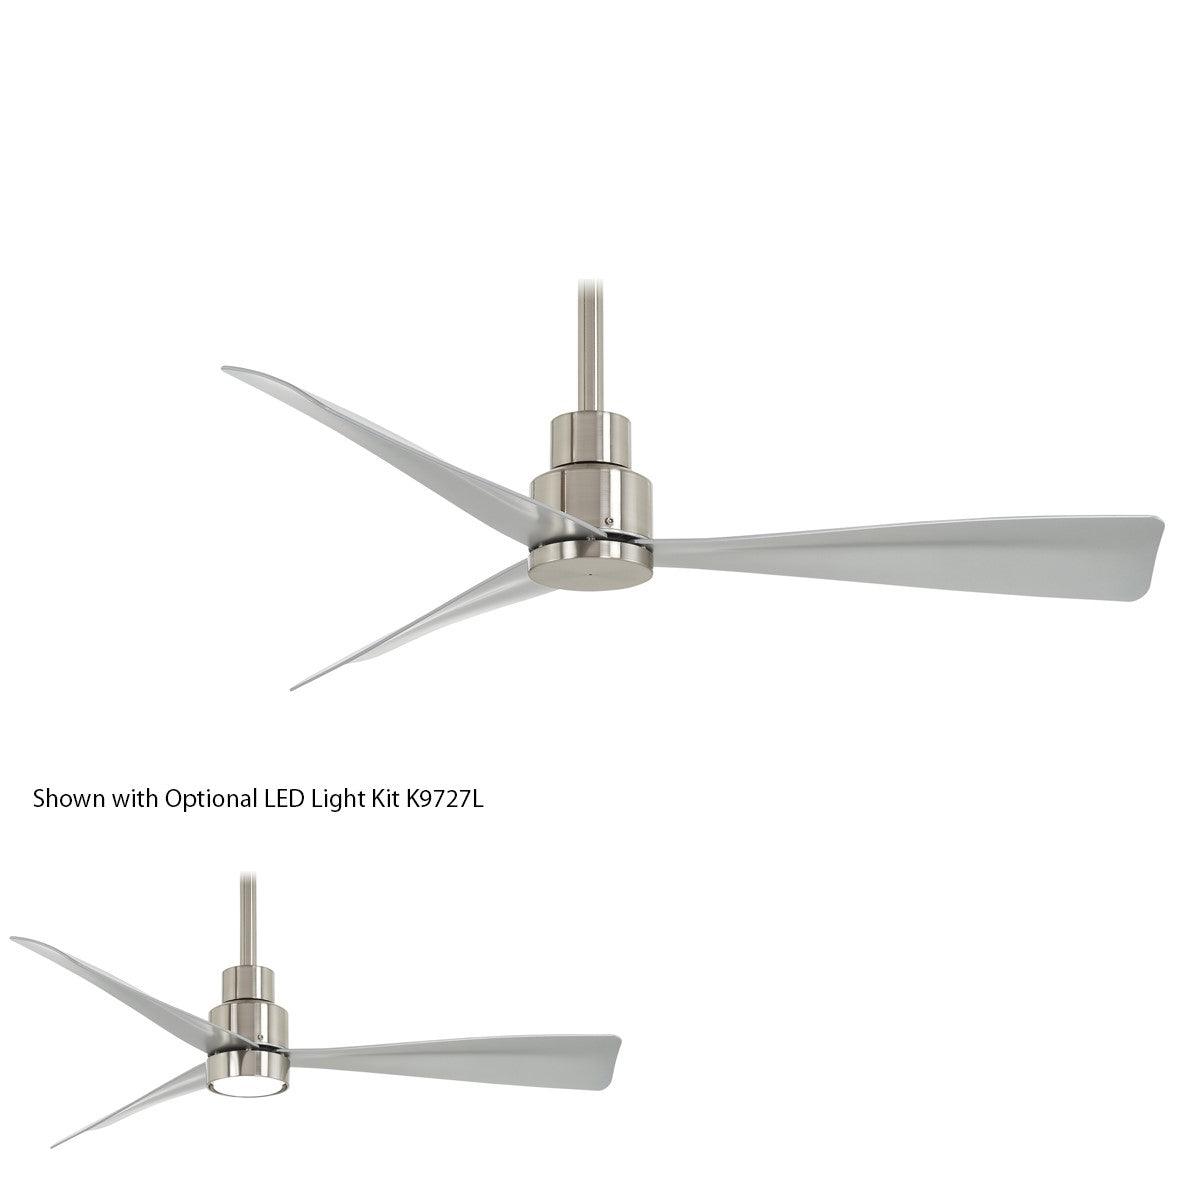 Simple 44 Inch Propeller Outdoor Ceiling Fan With Remote - Bees Lighting